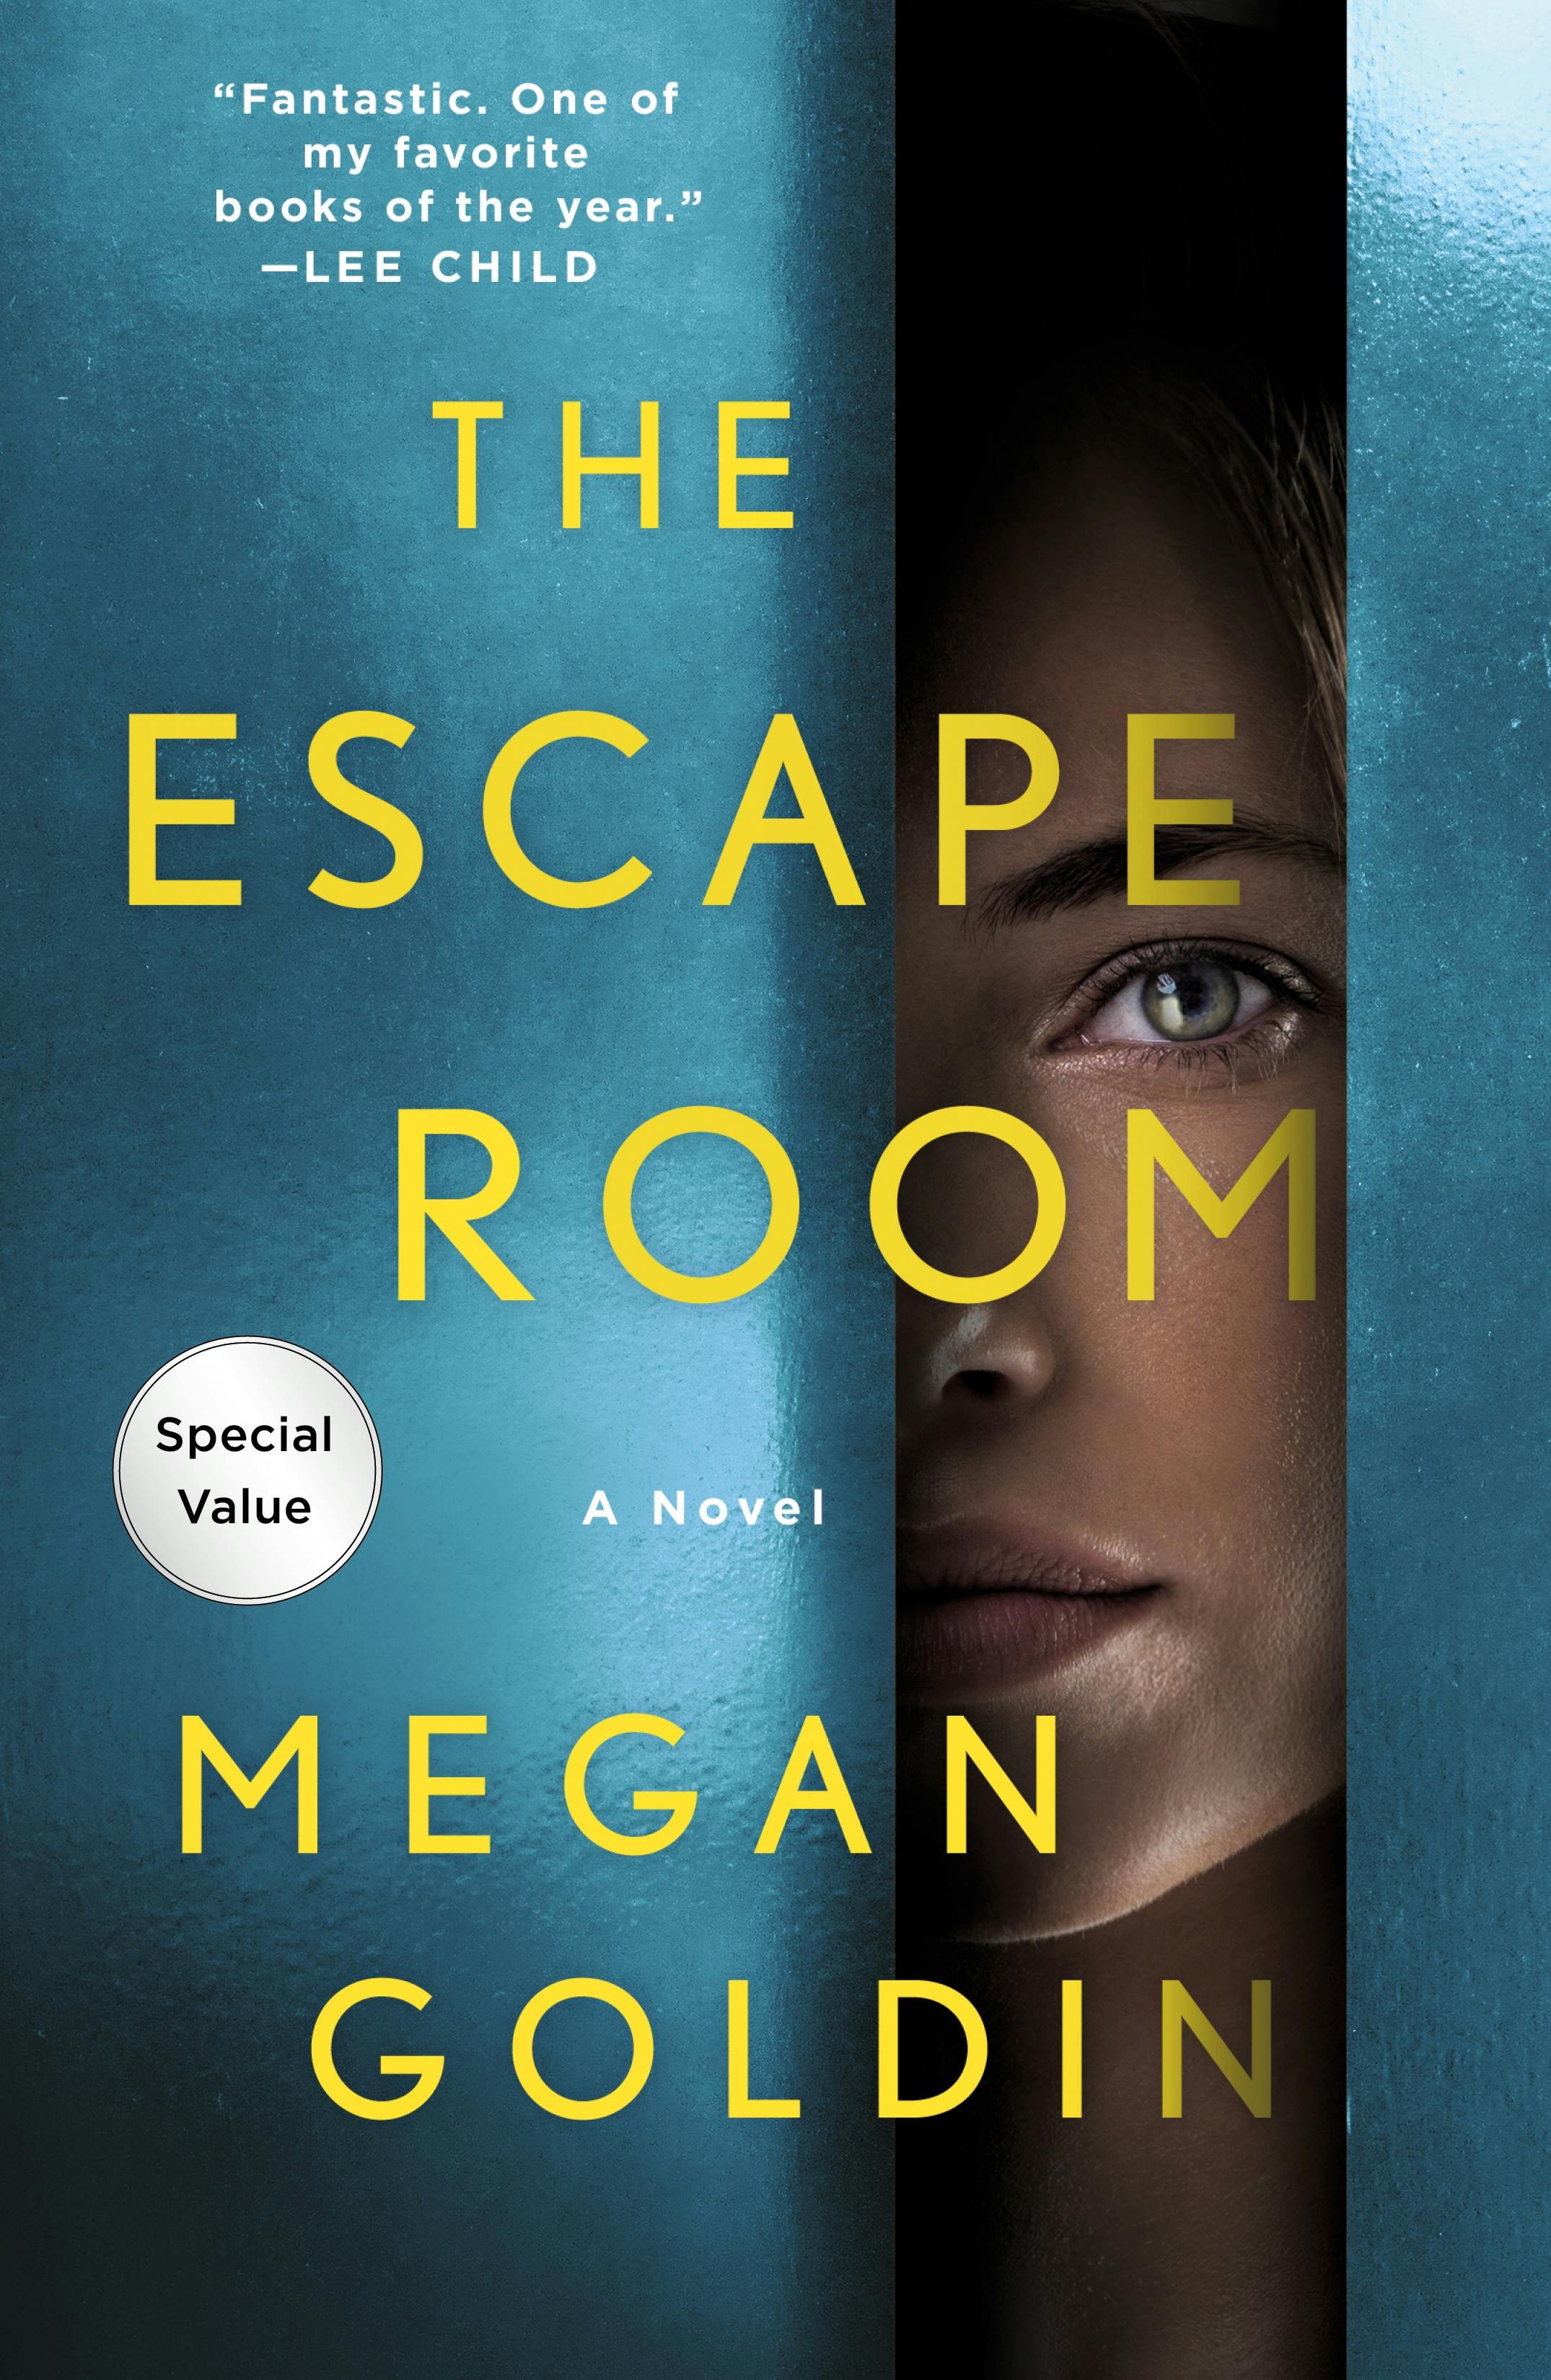 The Times Children's Book of the Week Escape Room